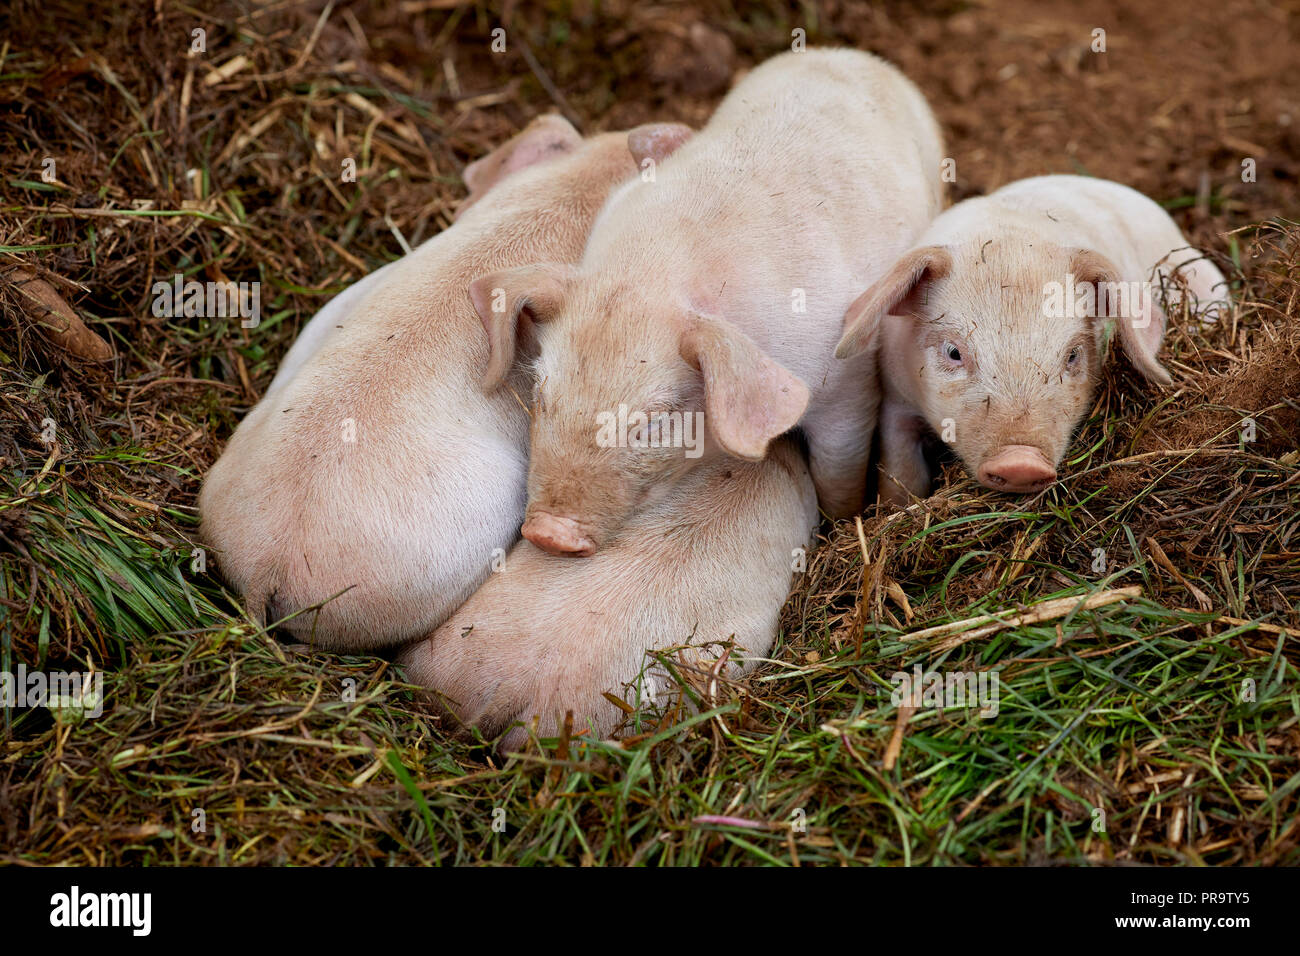 Lower Trevaskis Farm, Gwinear Rd, Hayle west Cornwall, farm shop and fruit picking. Pigs and piglets feeding of mother Stock Photo